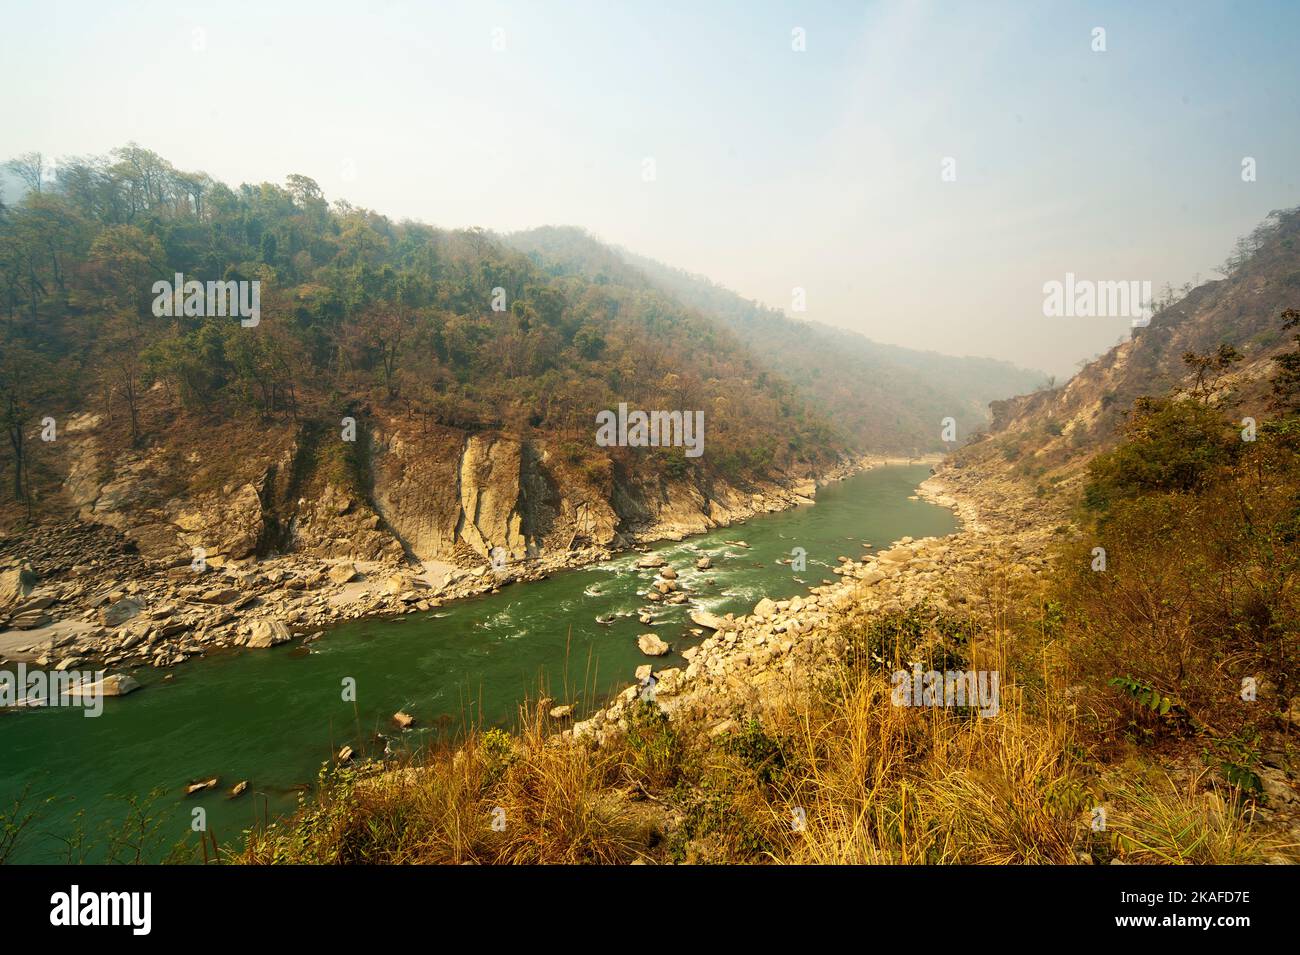 Sarda river on the India/Nepal border. This trek was made famous by Jim Corbett in his book Maneaters of Kumaon, Uttarakhand, India Stock Photo